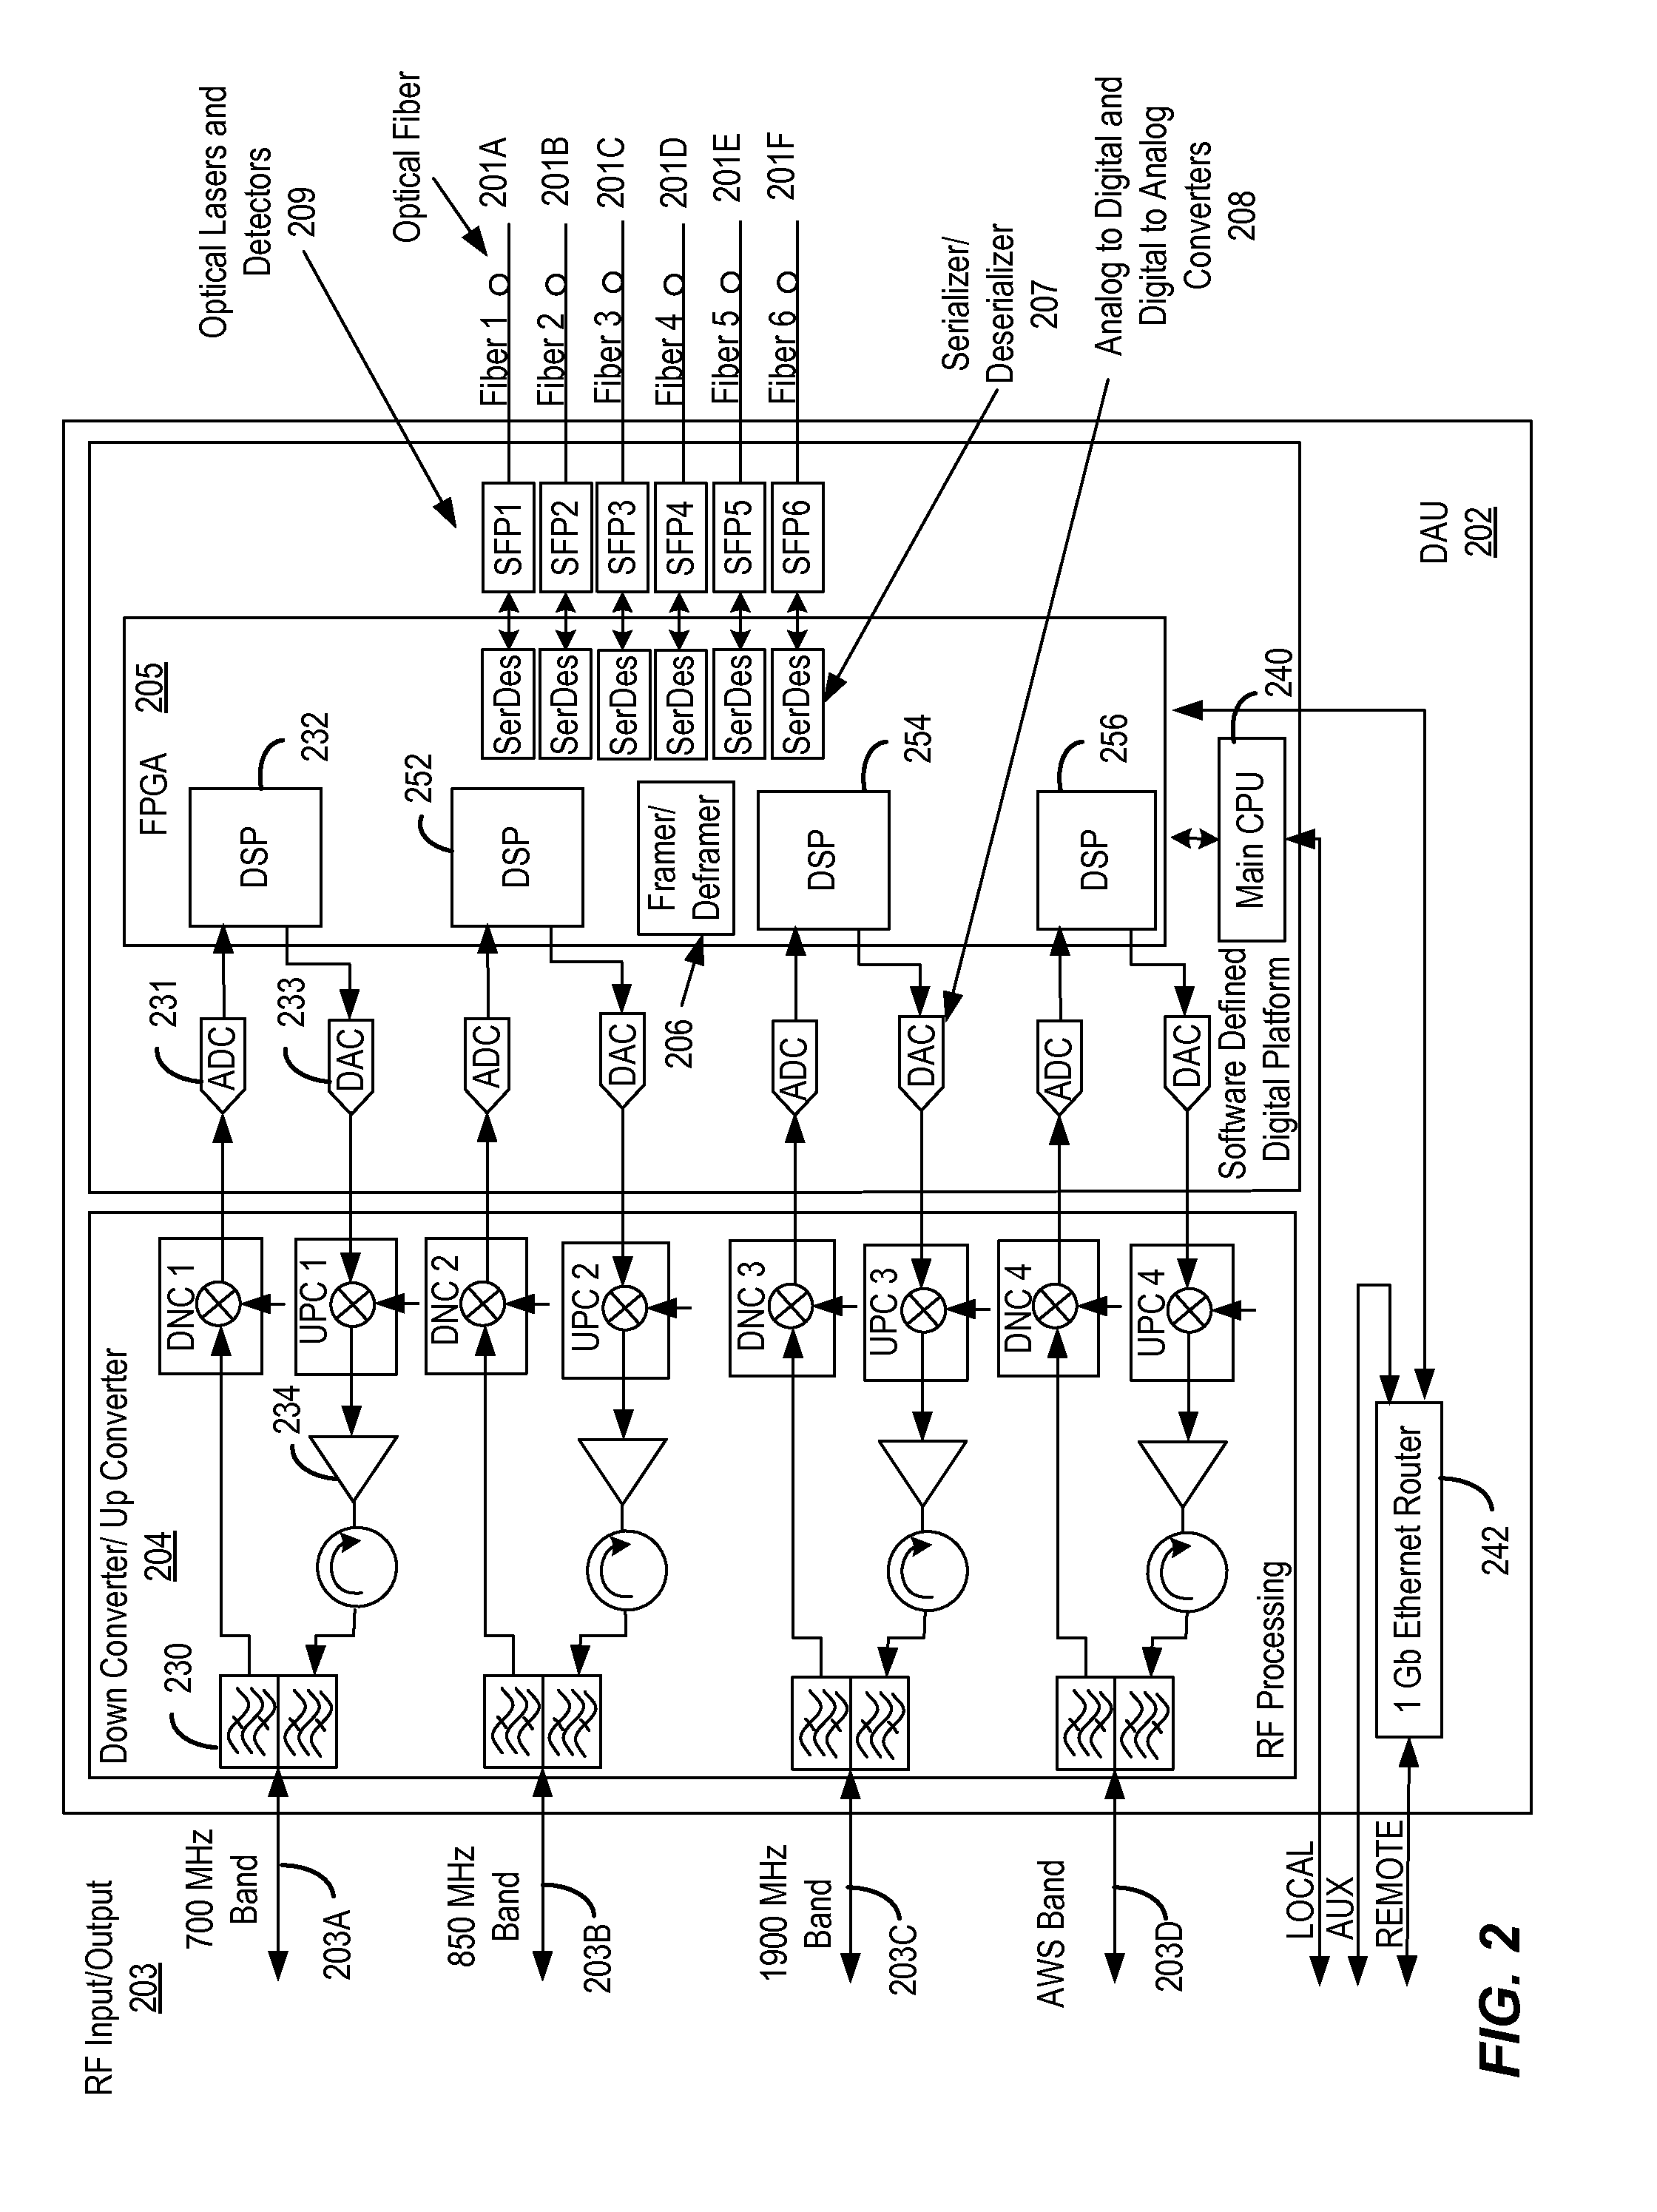 Network switch for a distributed antenna network